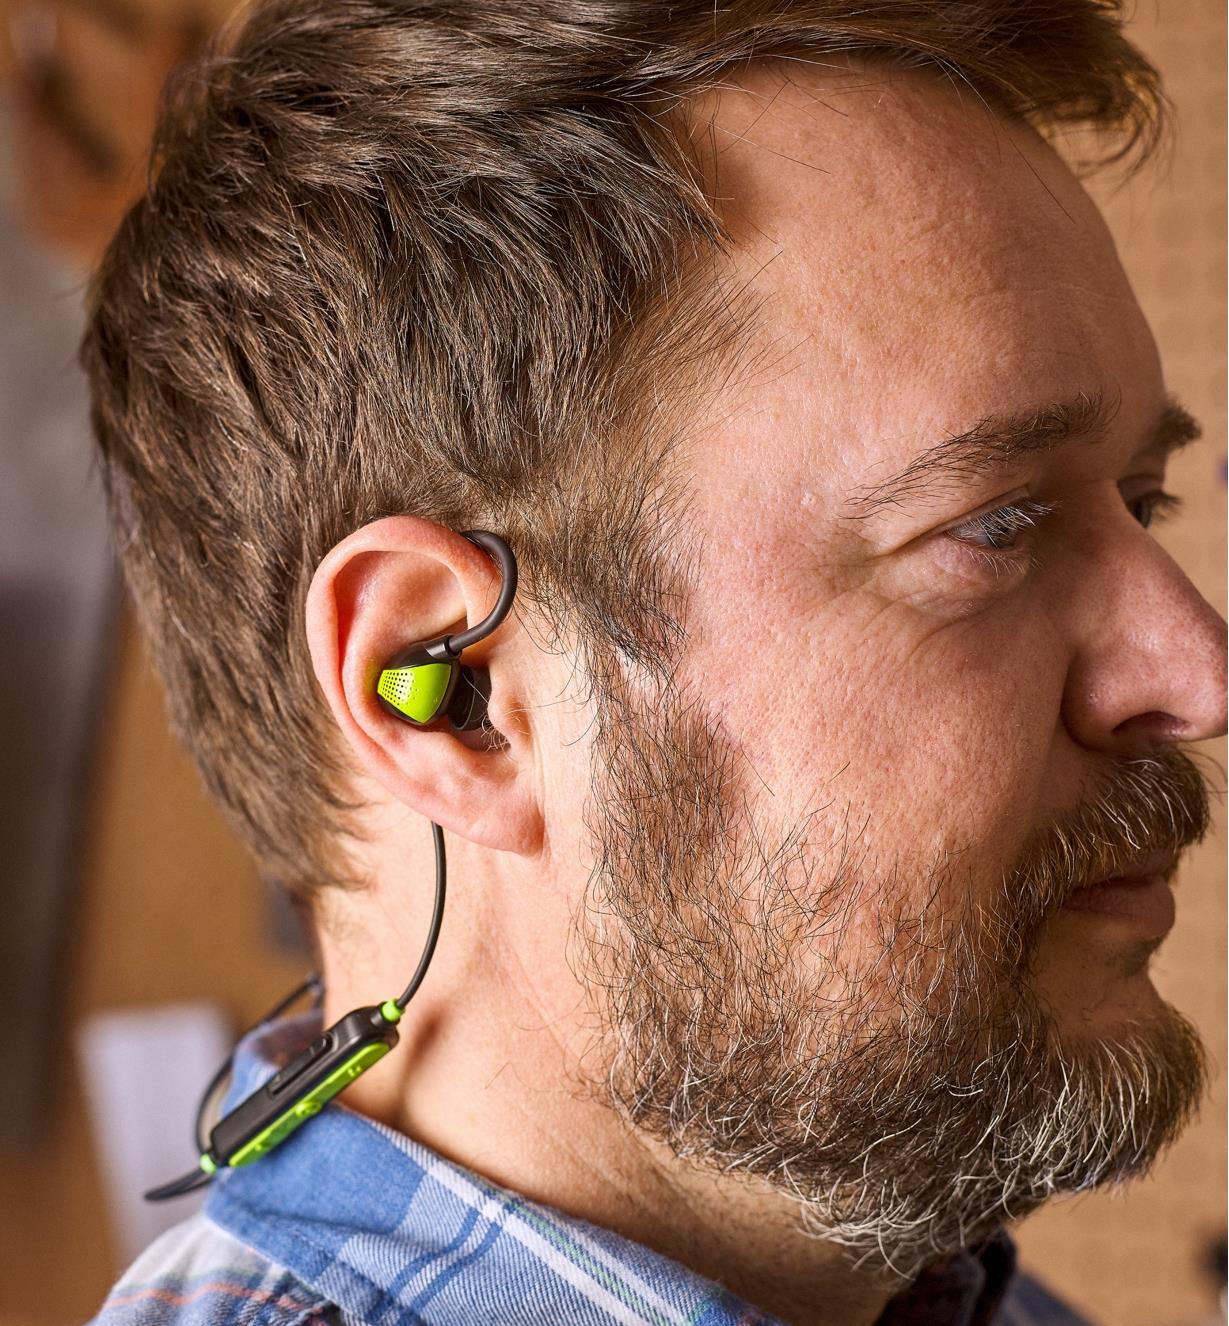 View of an ISOTunes PRO Aware hearing protector earbud worn in the ear